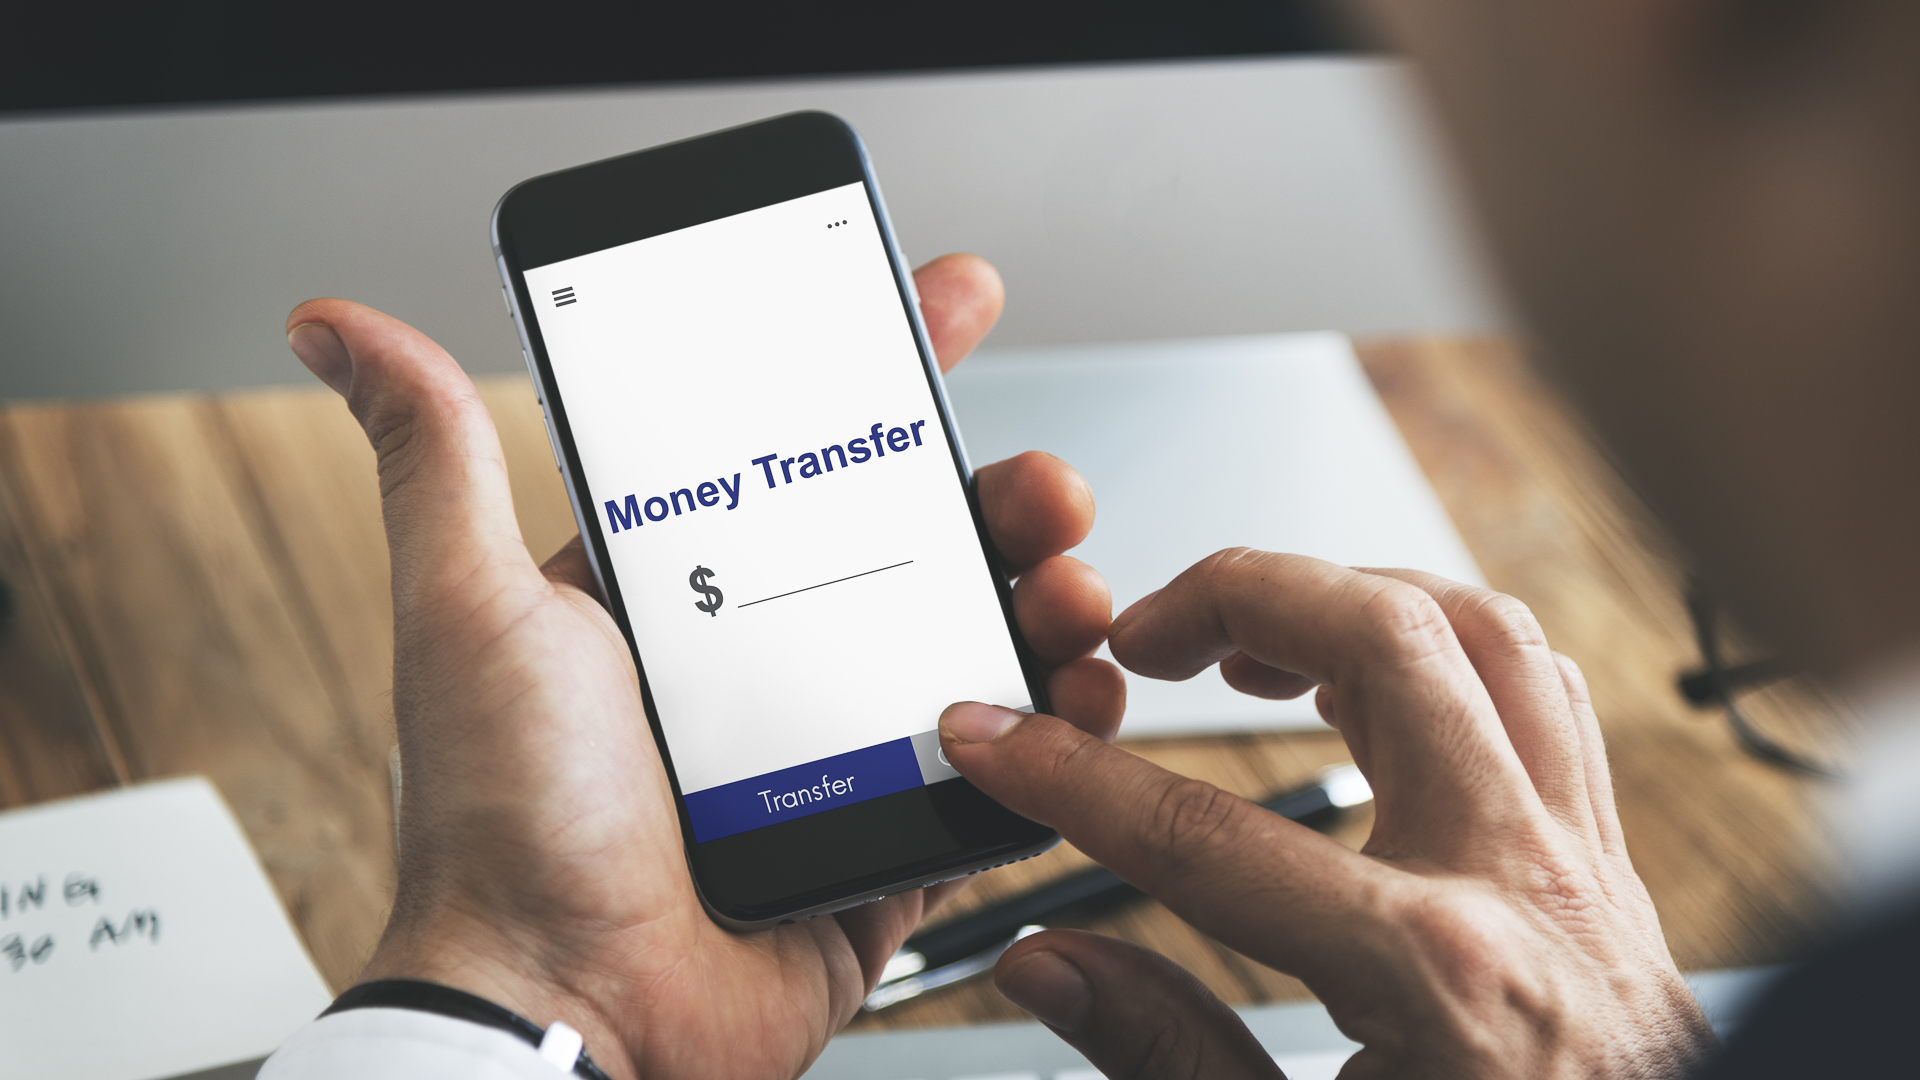 How To Transfer Money From One Bank to Another | GOBankingRates